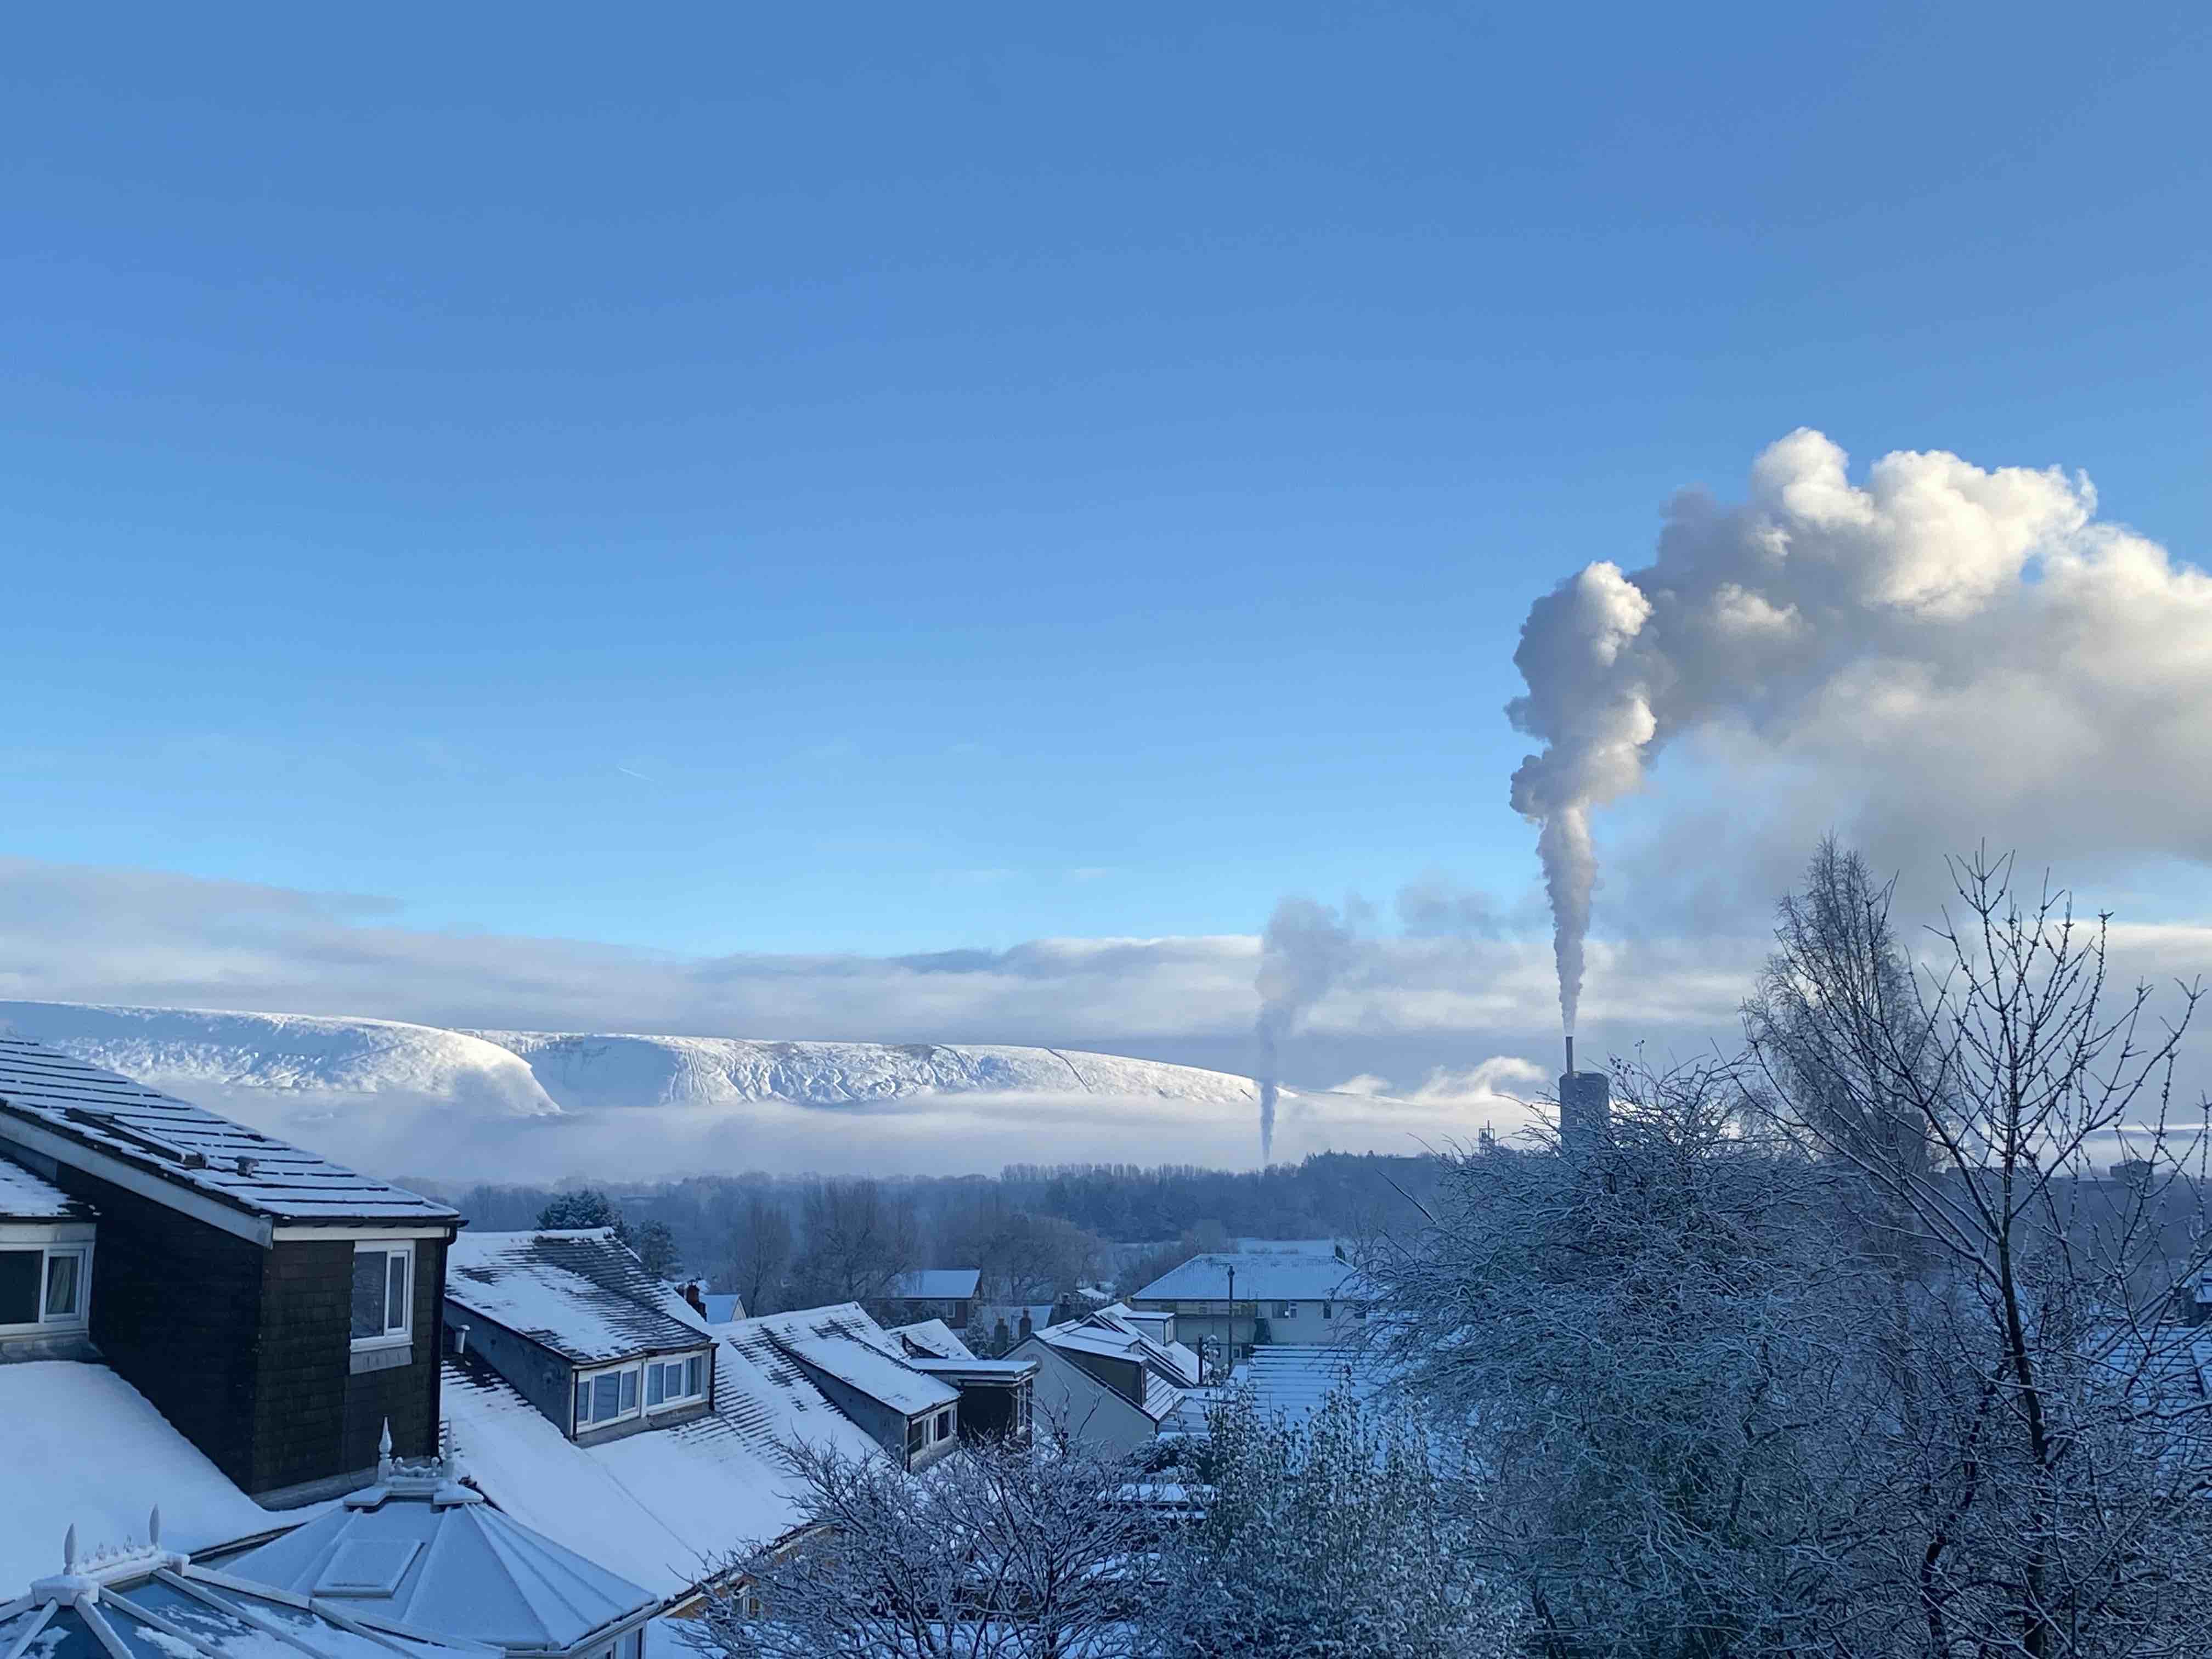 Snow over Pendle with Smoke Trails